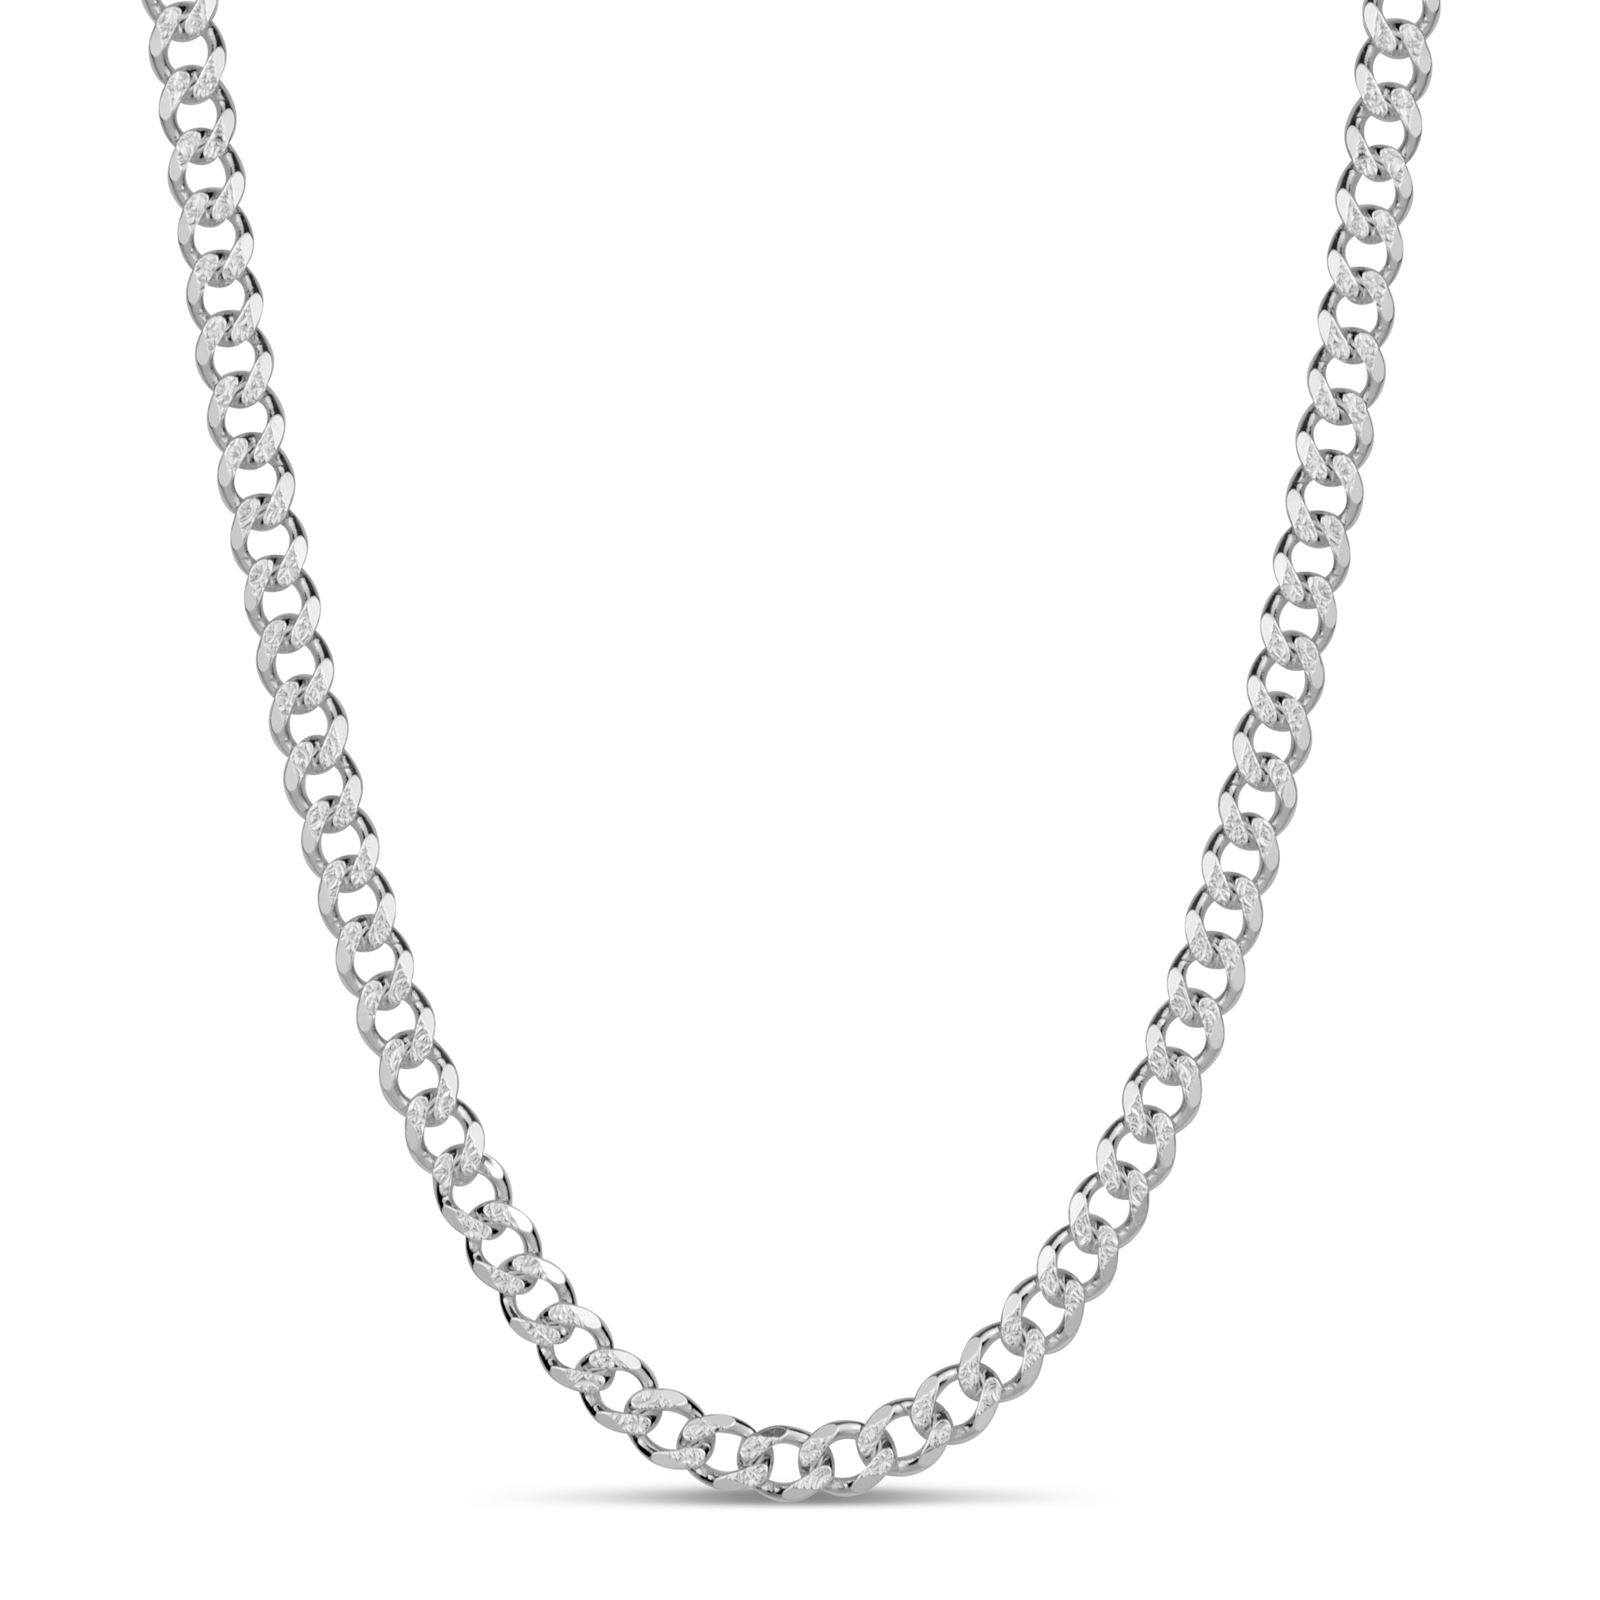 Sterling Silver Pav&#233; Curb 150 Guage 30 Inch Necklace